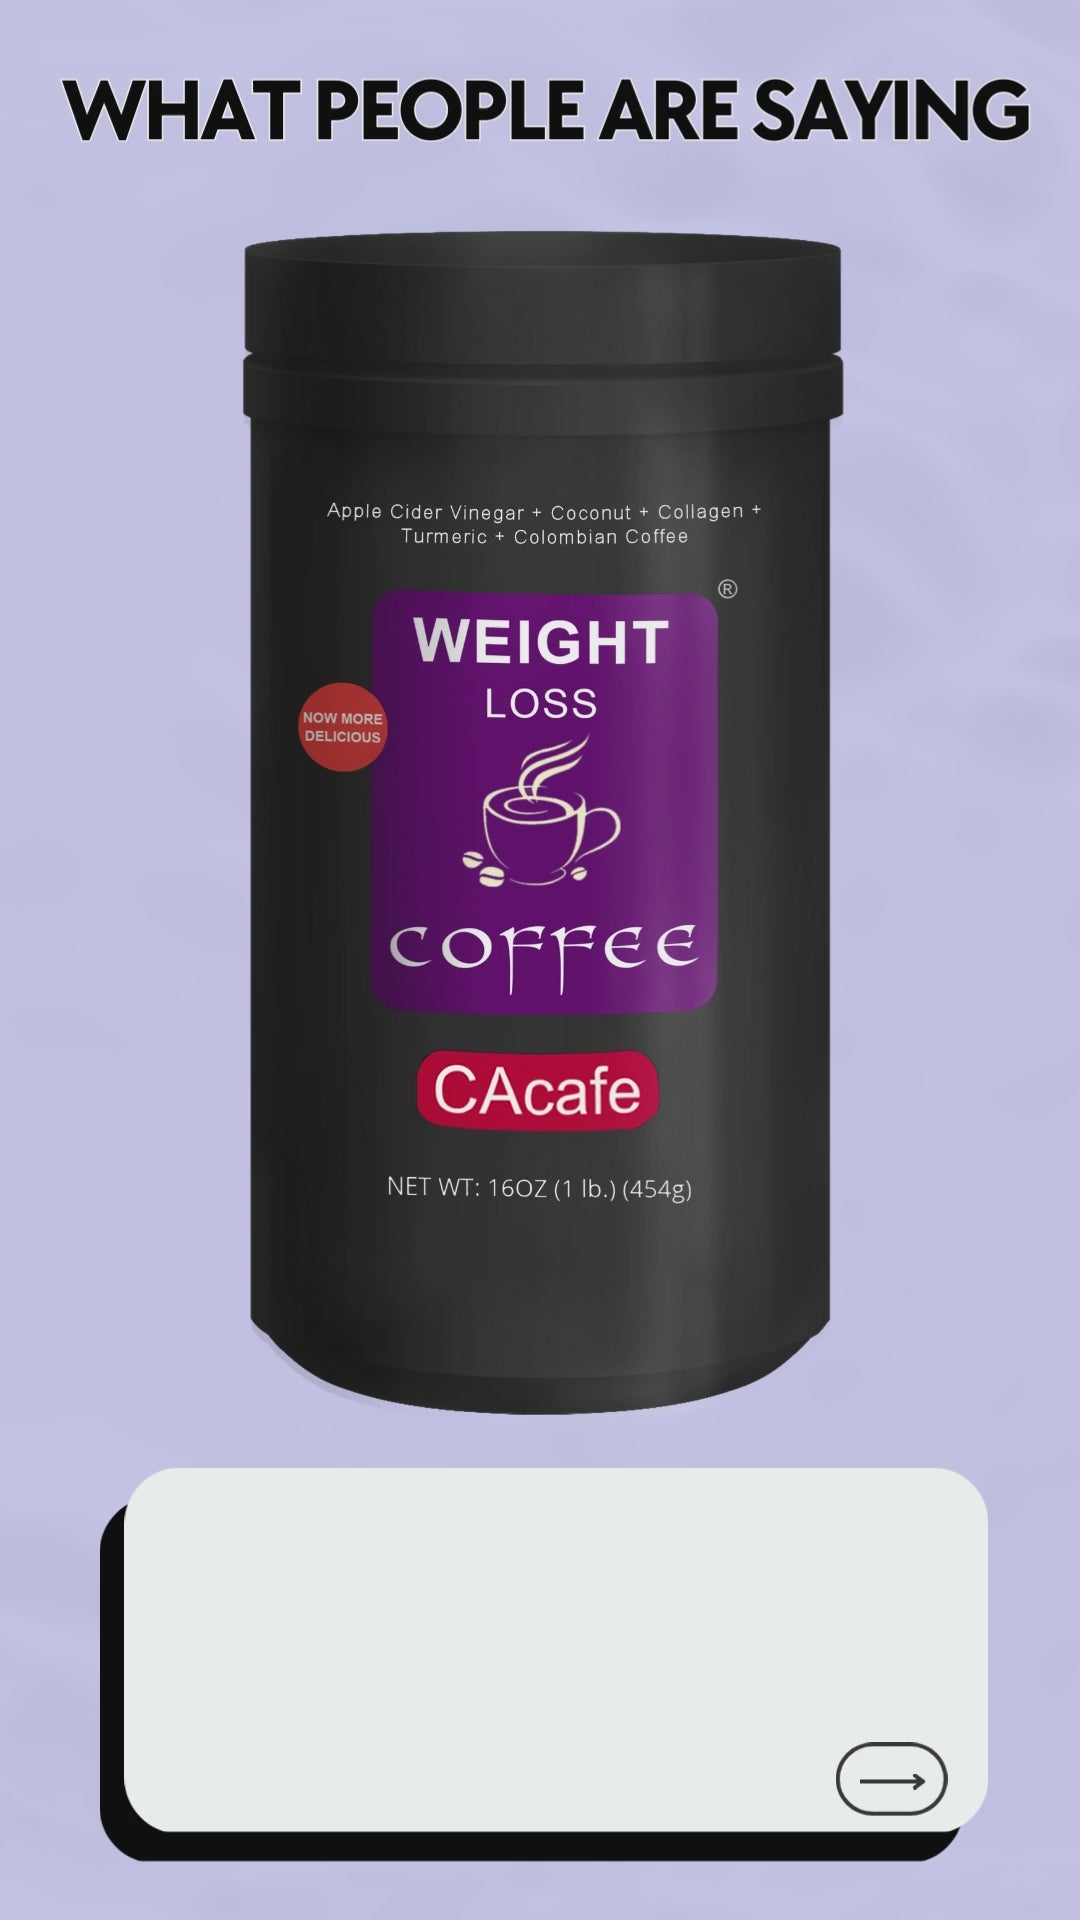 Apple Cider Vinegar Weight Loss Coffee 16oz (Now More Delicious!)